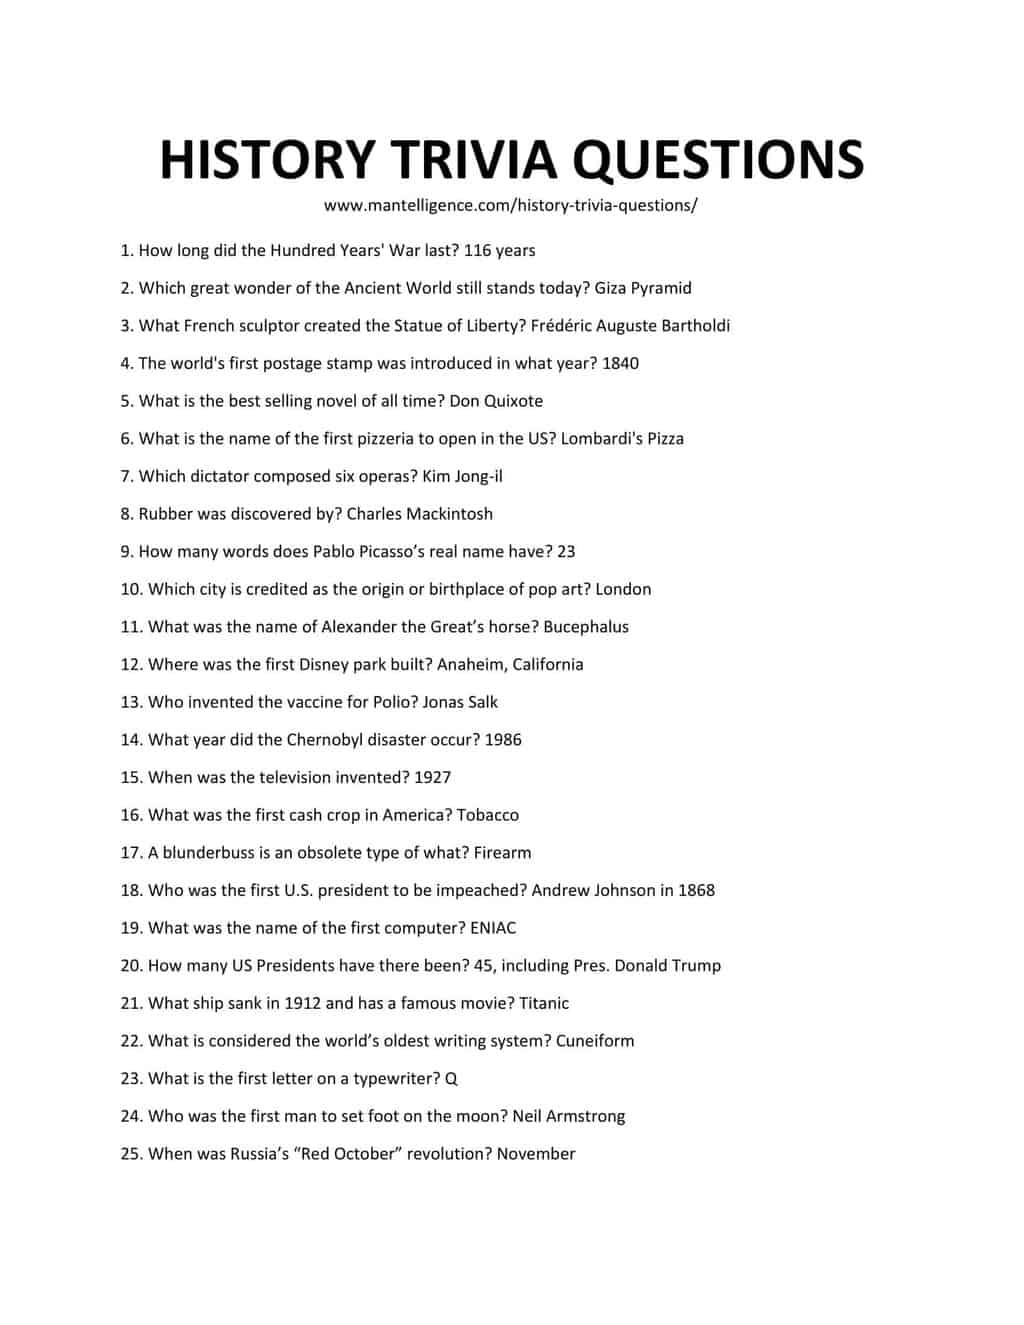 History Quizzes & Questions: Test Your Historical Trivia Knowledge -  HistoryExtra